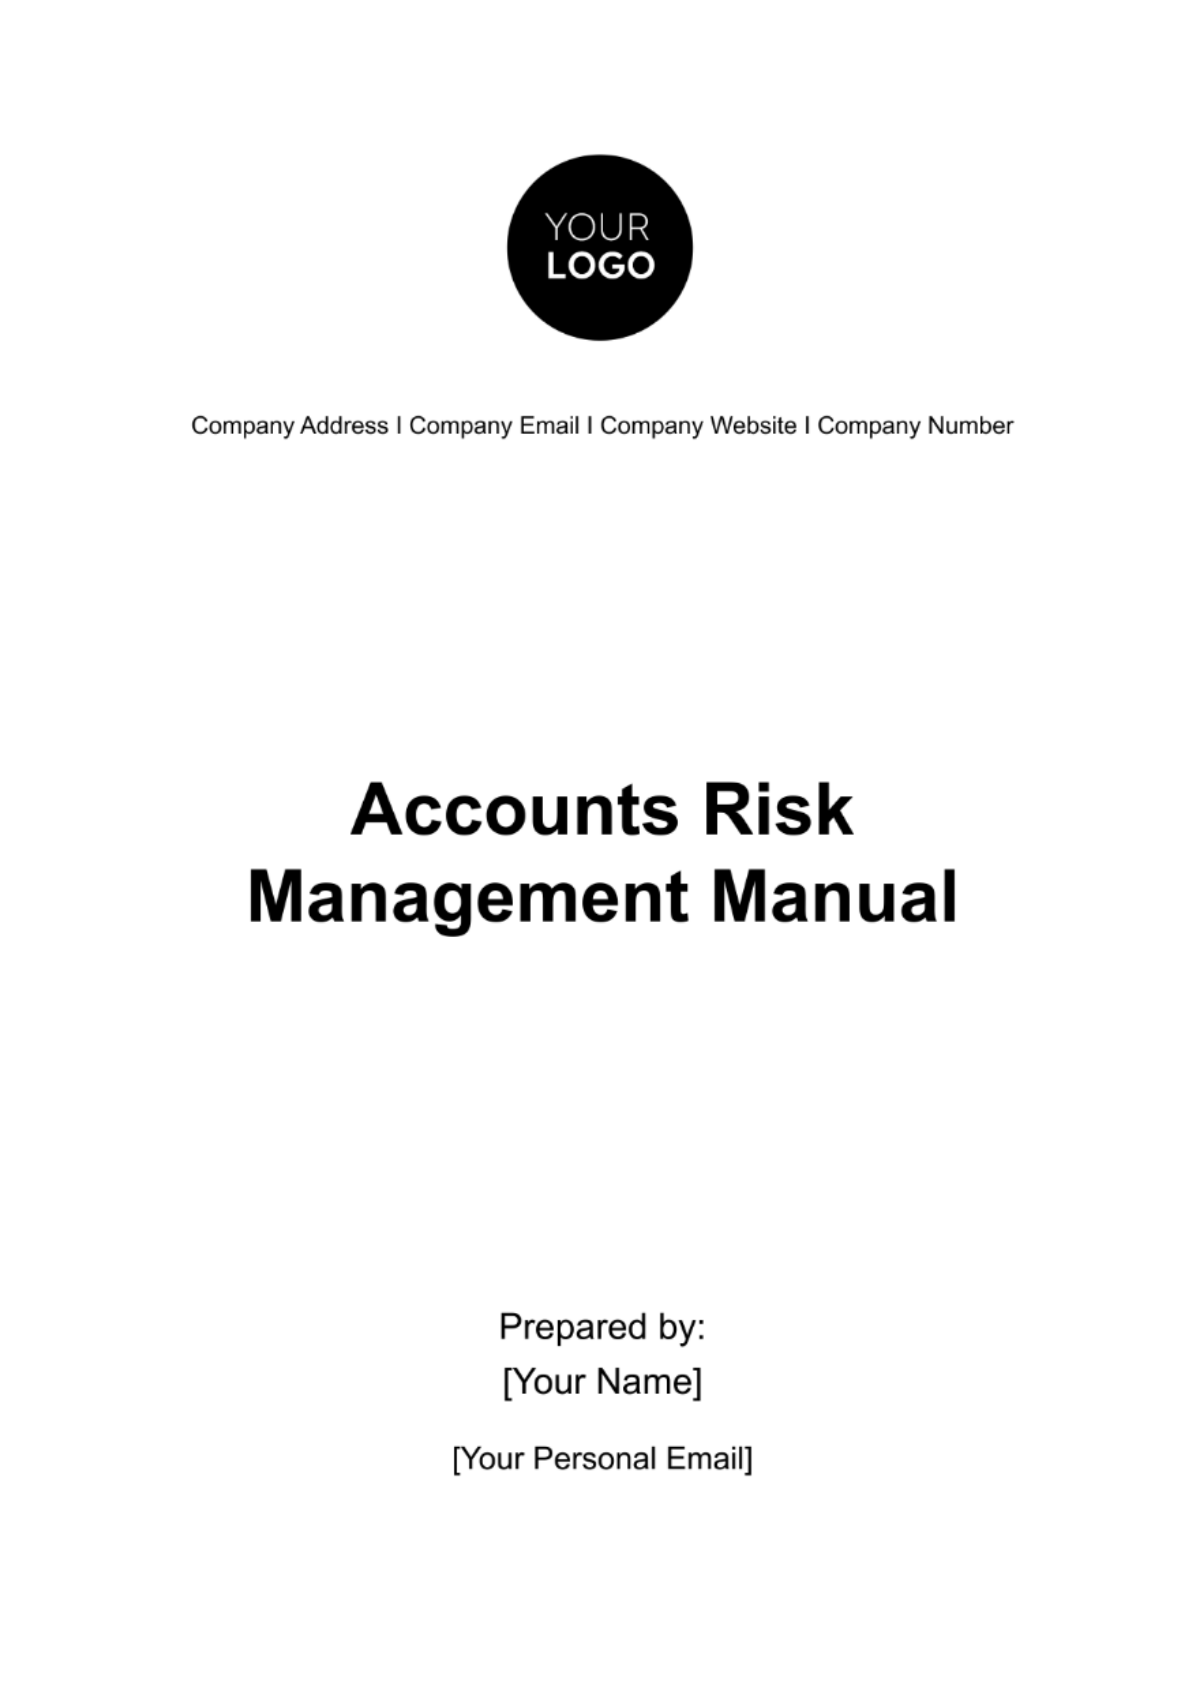 Accounts Risk Management Manual Template